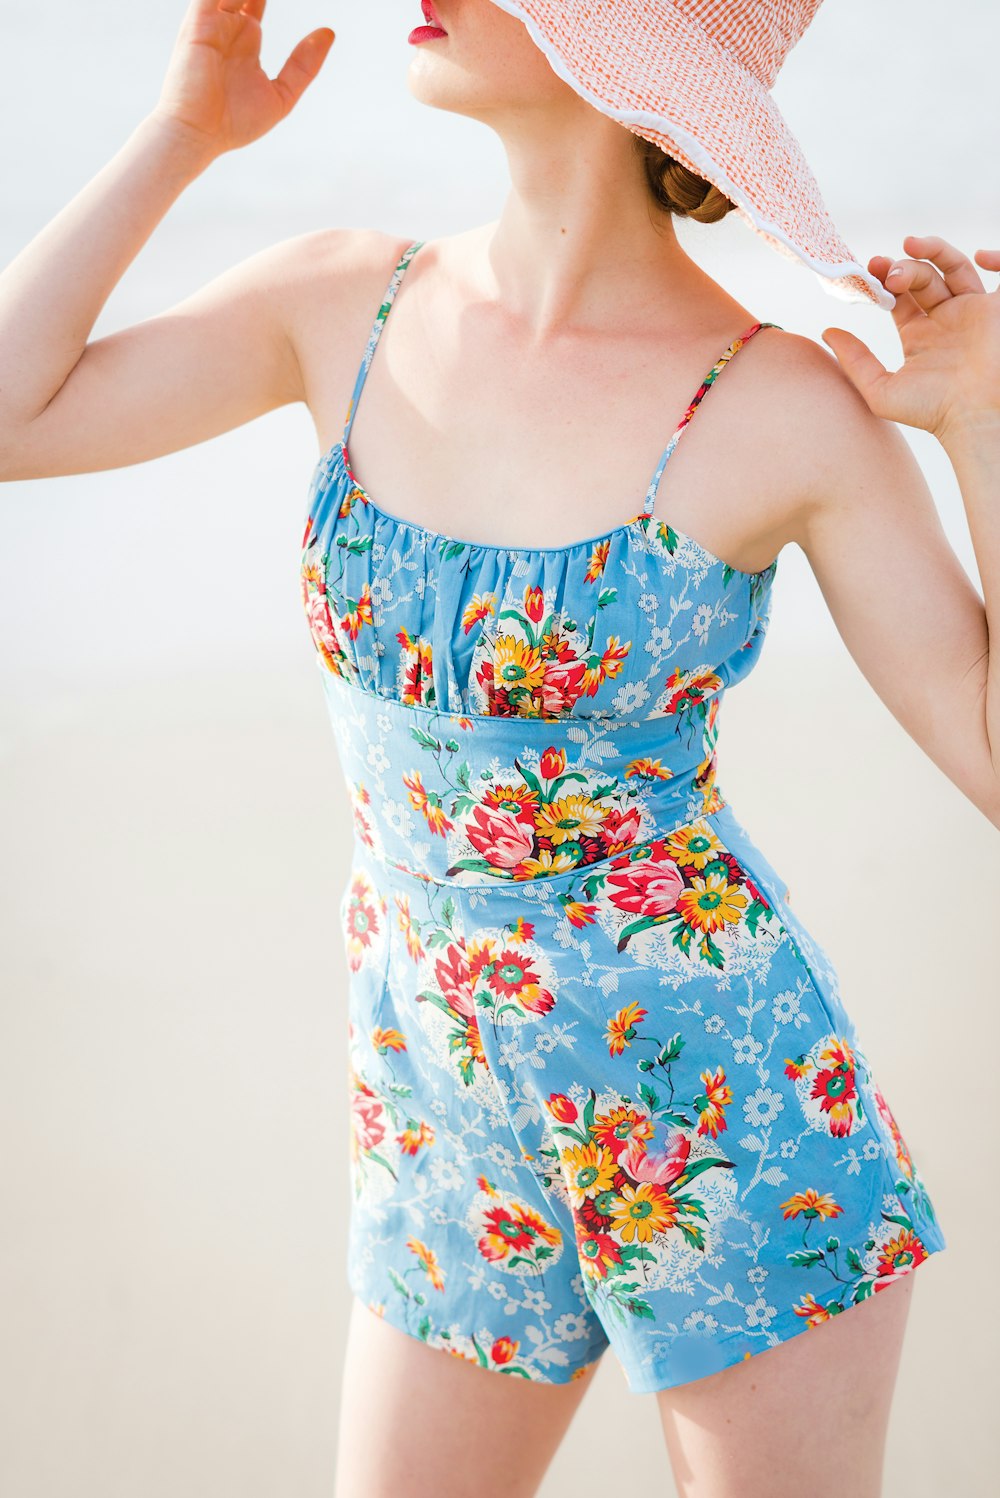 woman wearing blue floral rompers and brown hat